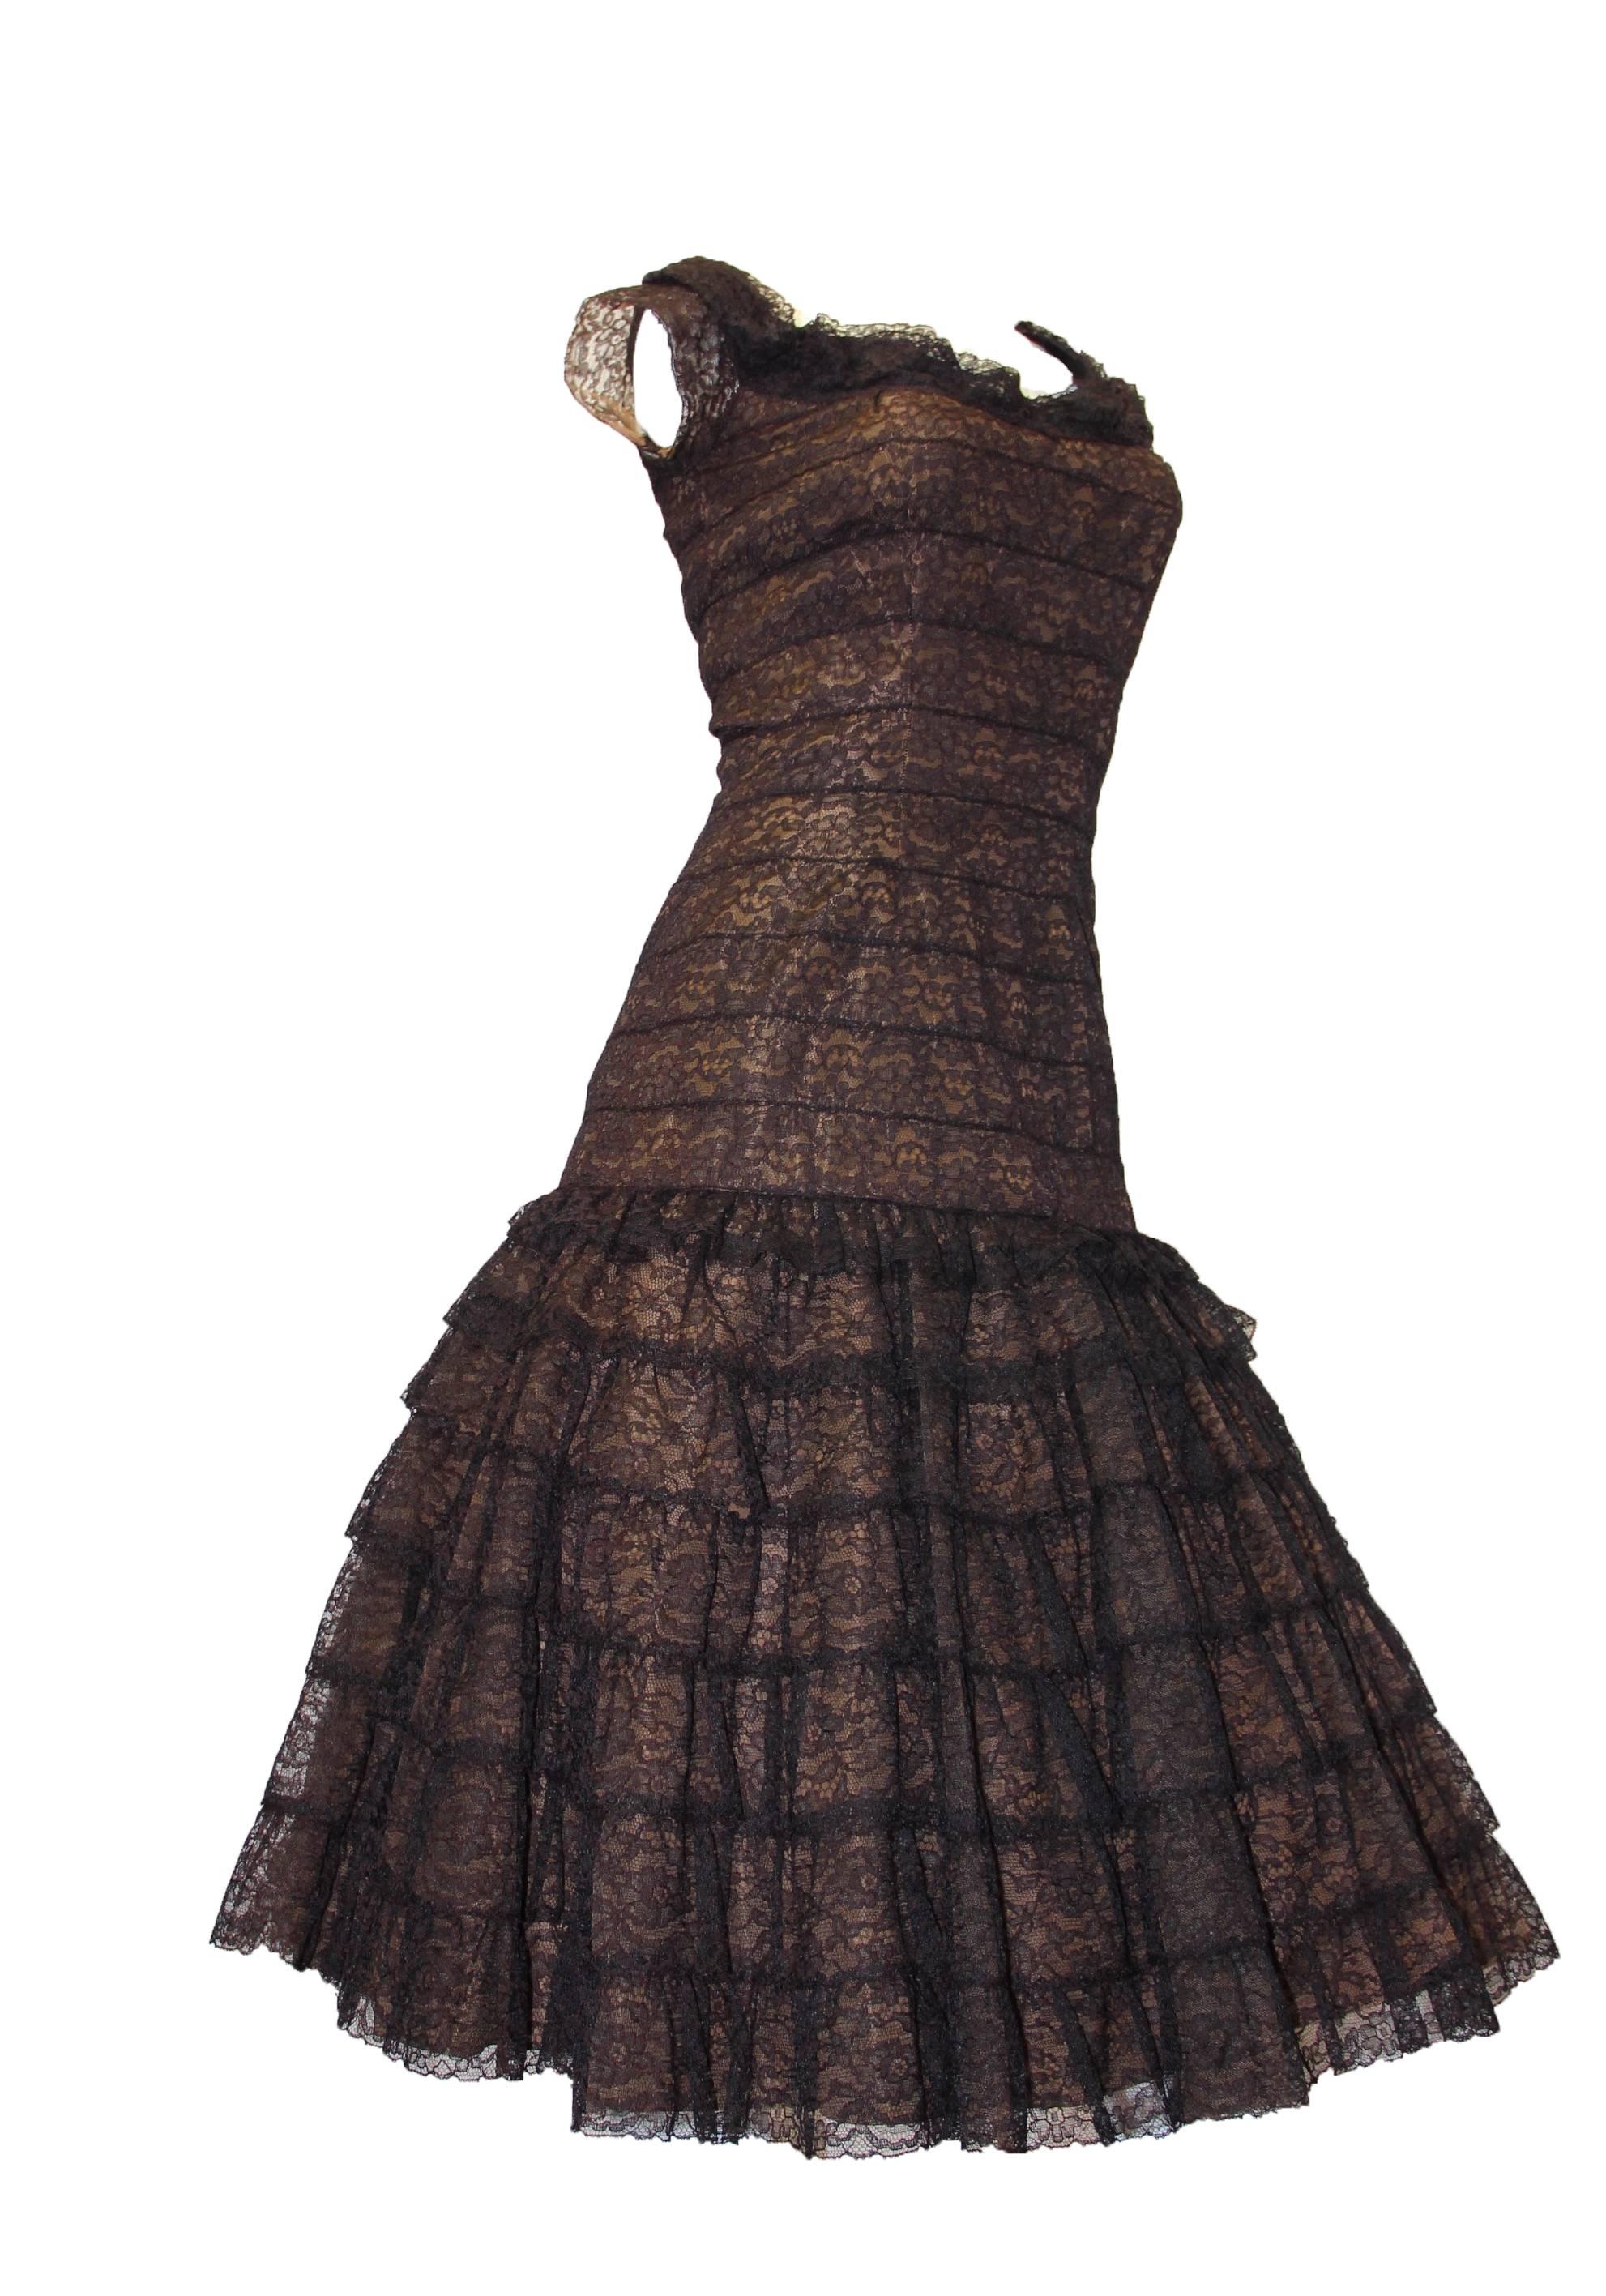 50s drop waist lace tiered skirt with fitted bodice. Slightly off shoulder. Chocolate brown lace, mocha colored lining. 

Bust: 34-36 inches
Waist: 26 inches
Hip: up to 39 inches
Length: 44 inches